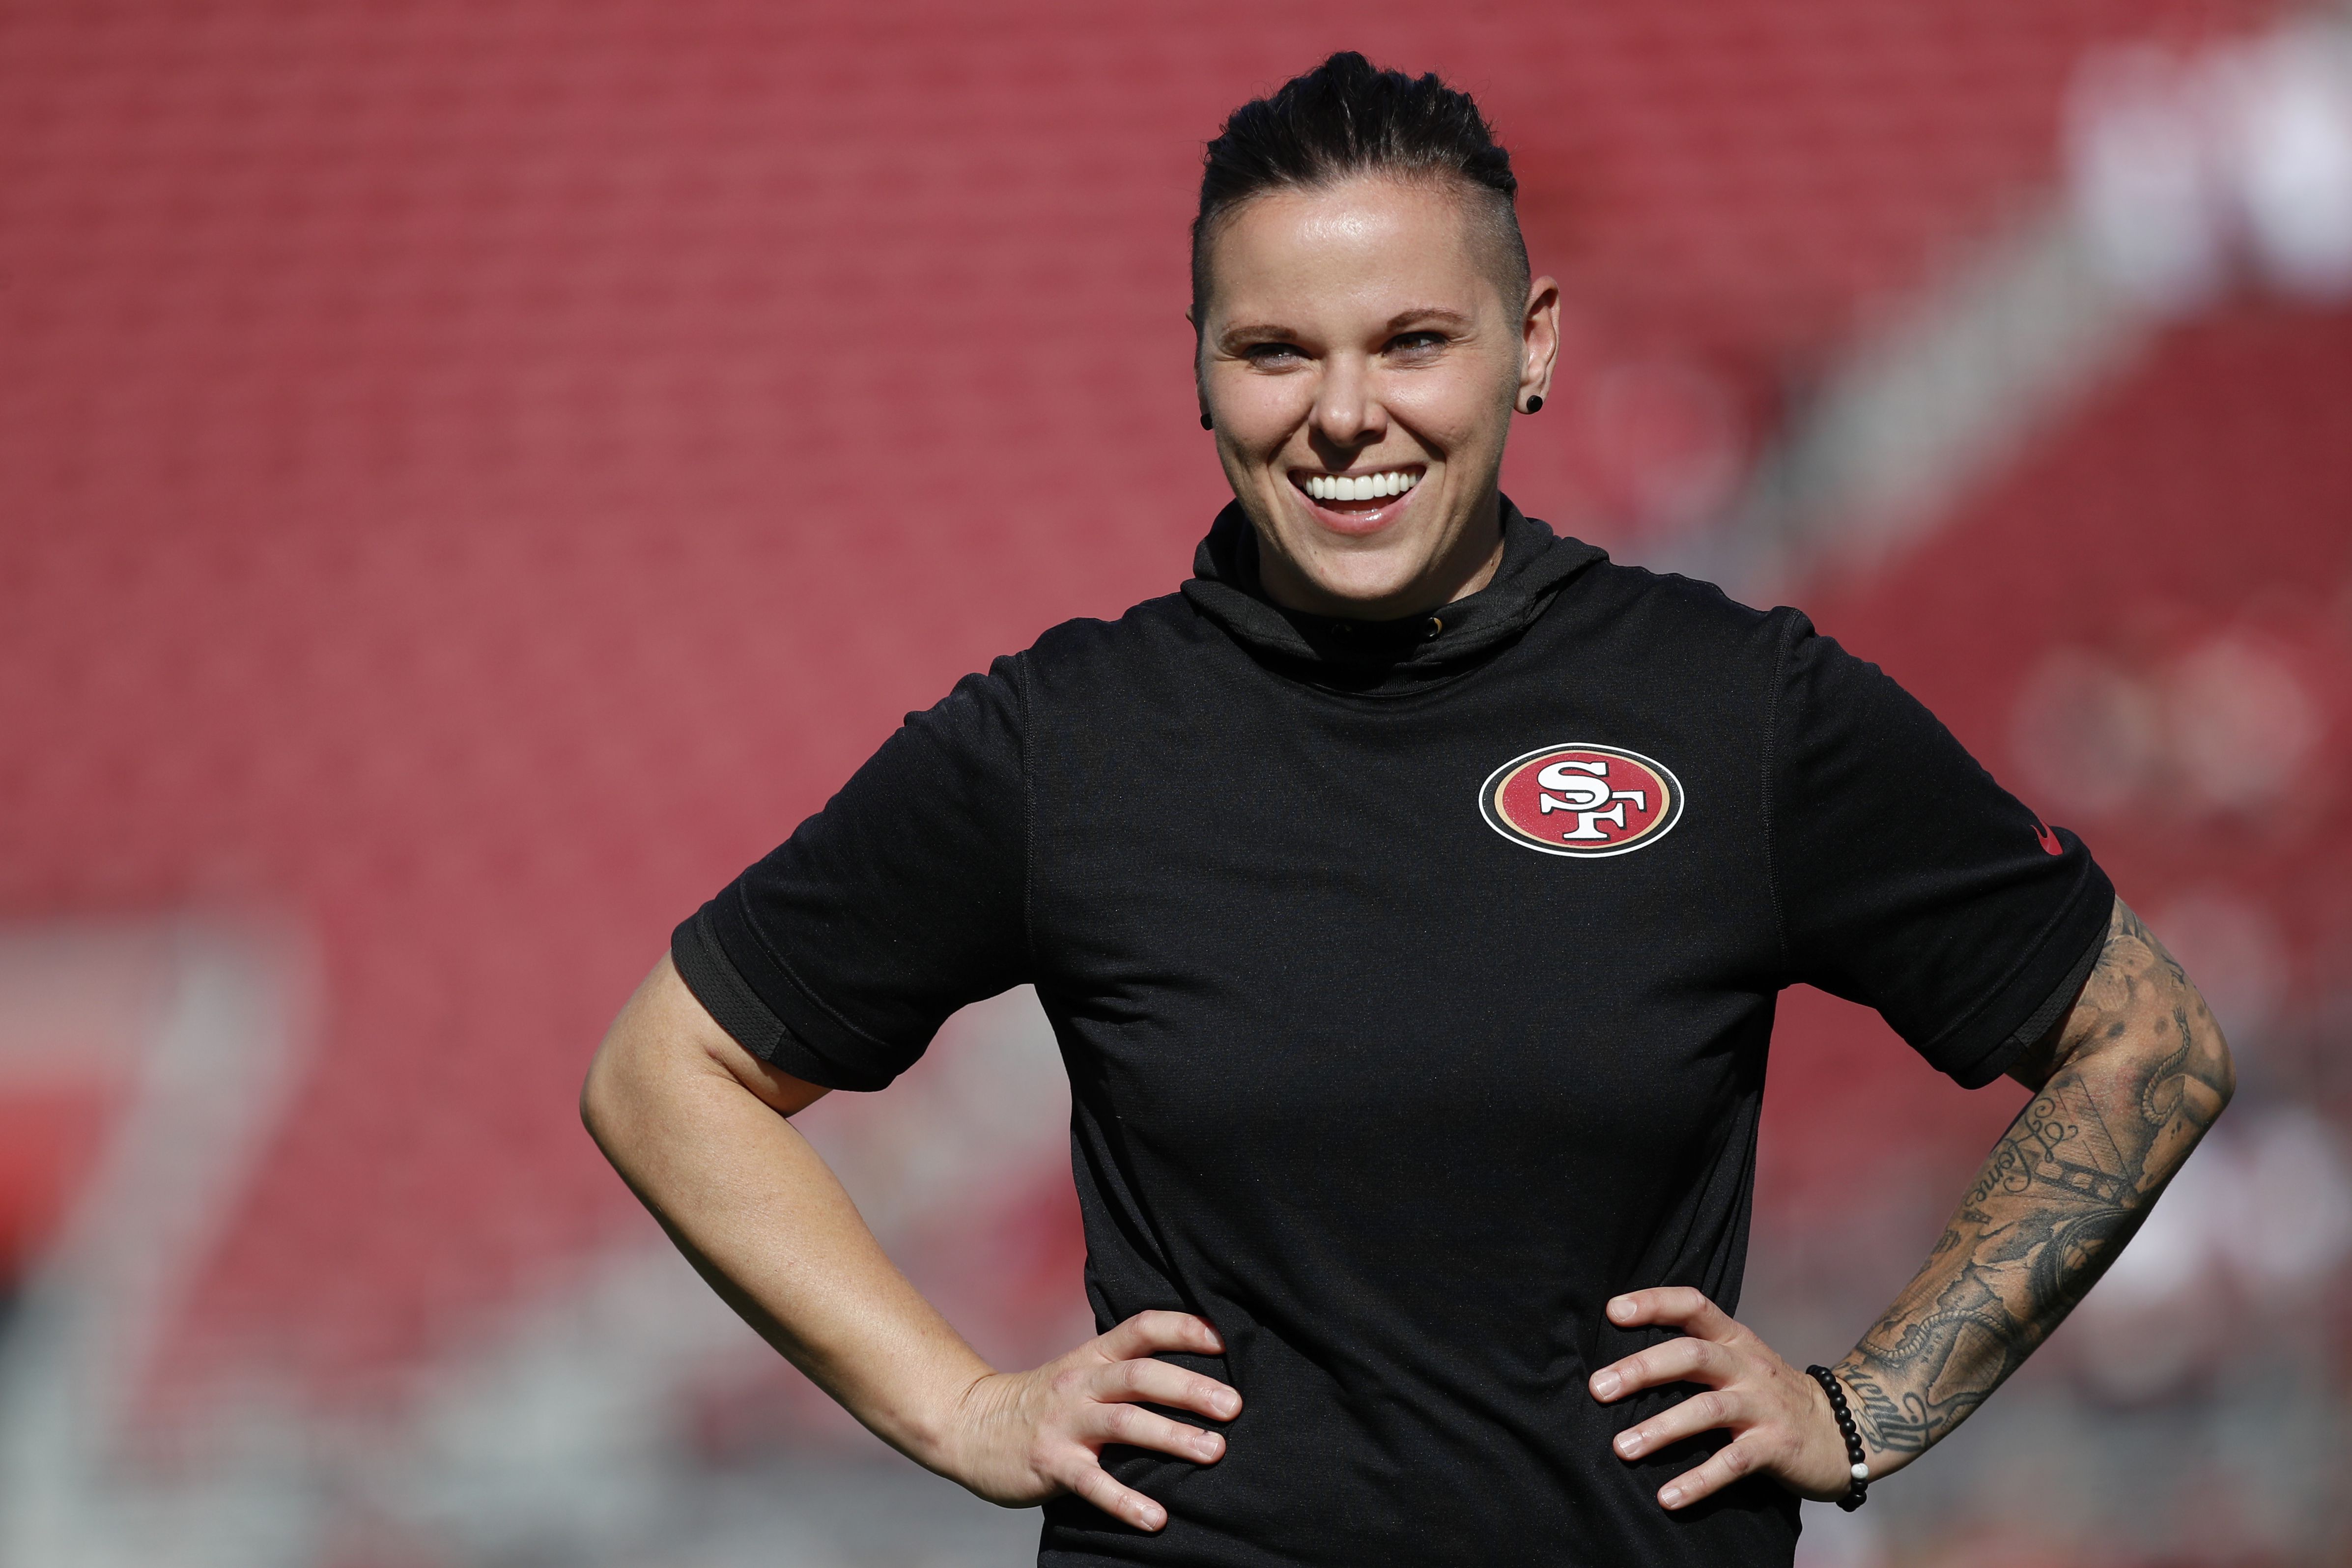 From Kansas to the 49ers, Katie Sowers makes NFL history